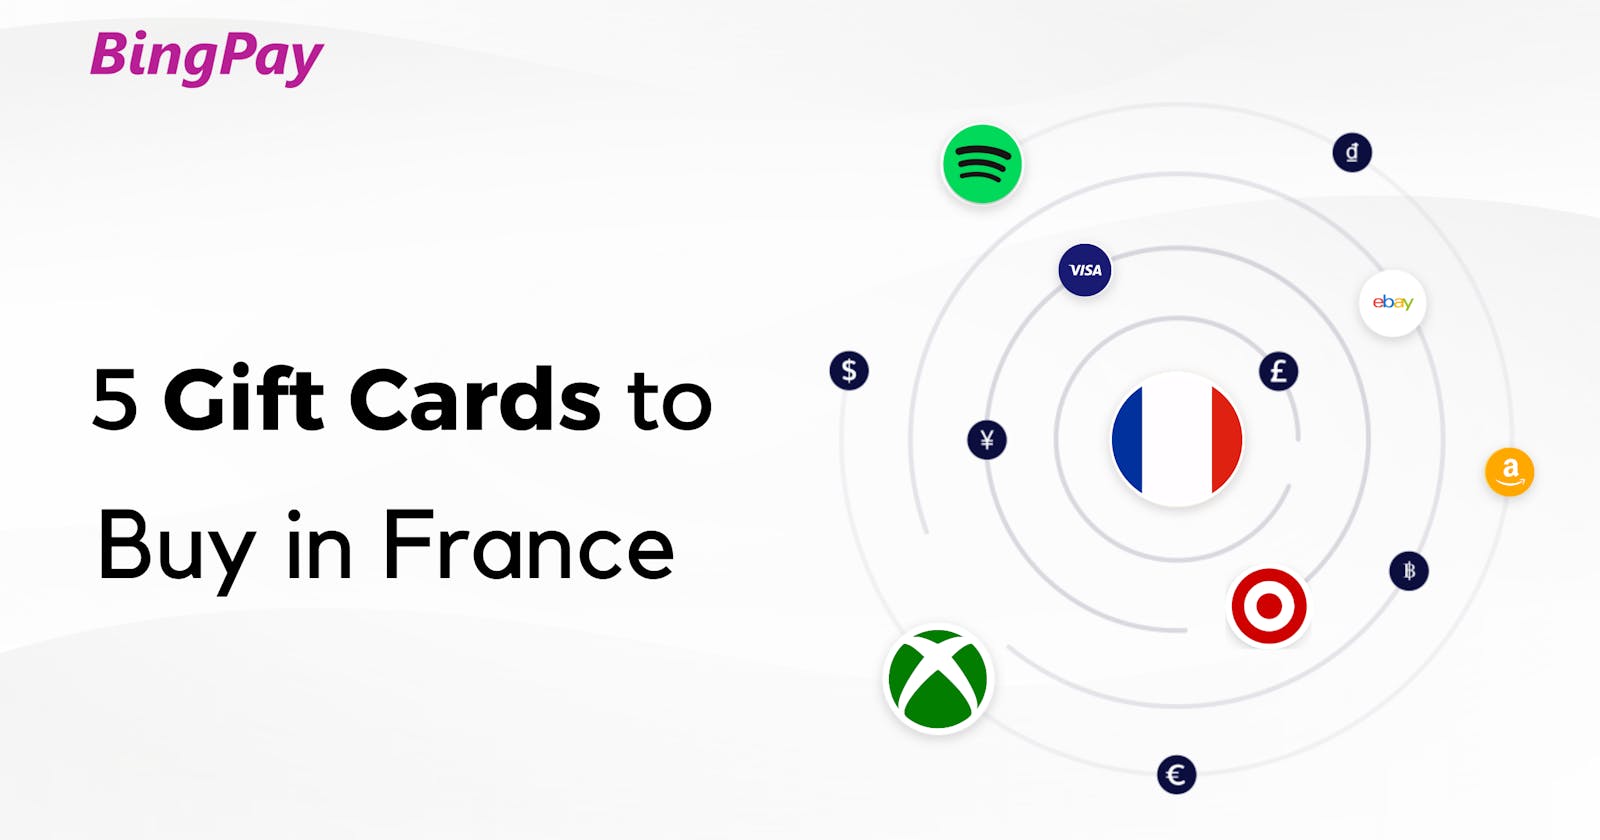 5 Gift Cards to Buy in France